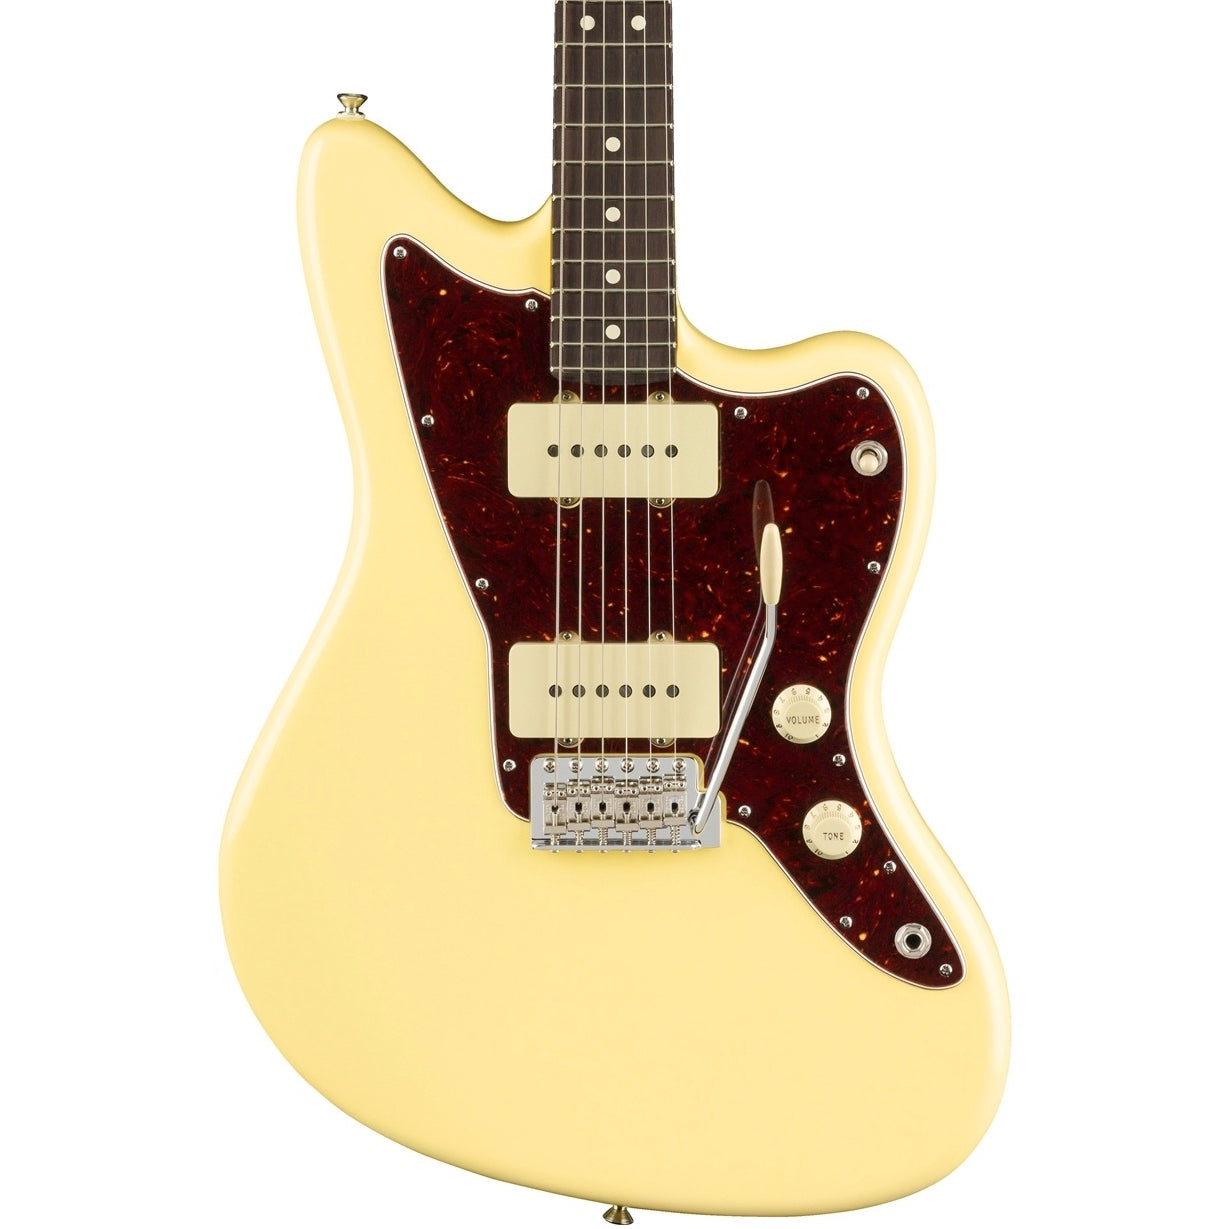 Fender American Performer Jazzmaster Vintage White | Music Experience | Shop Online | South Africa